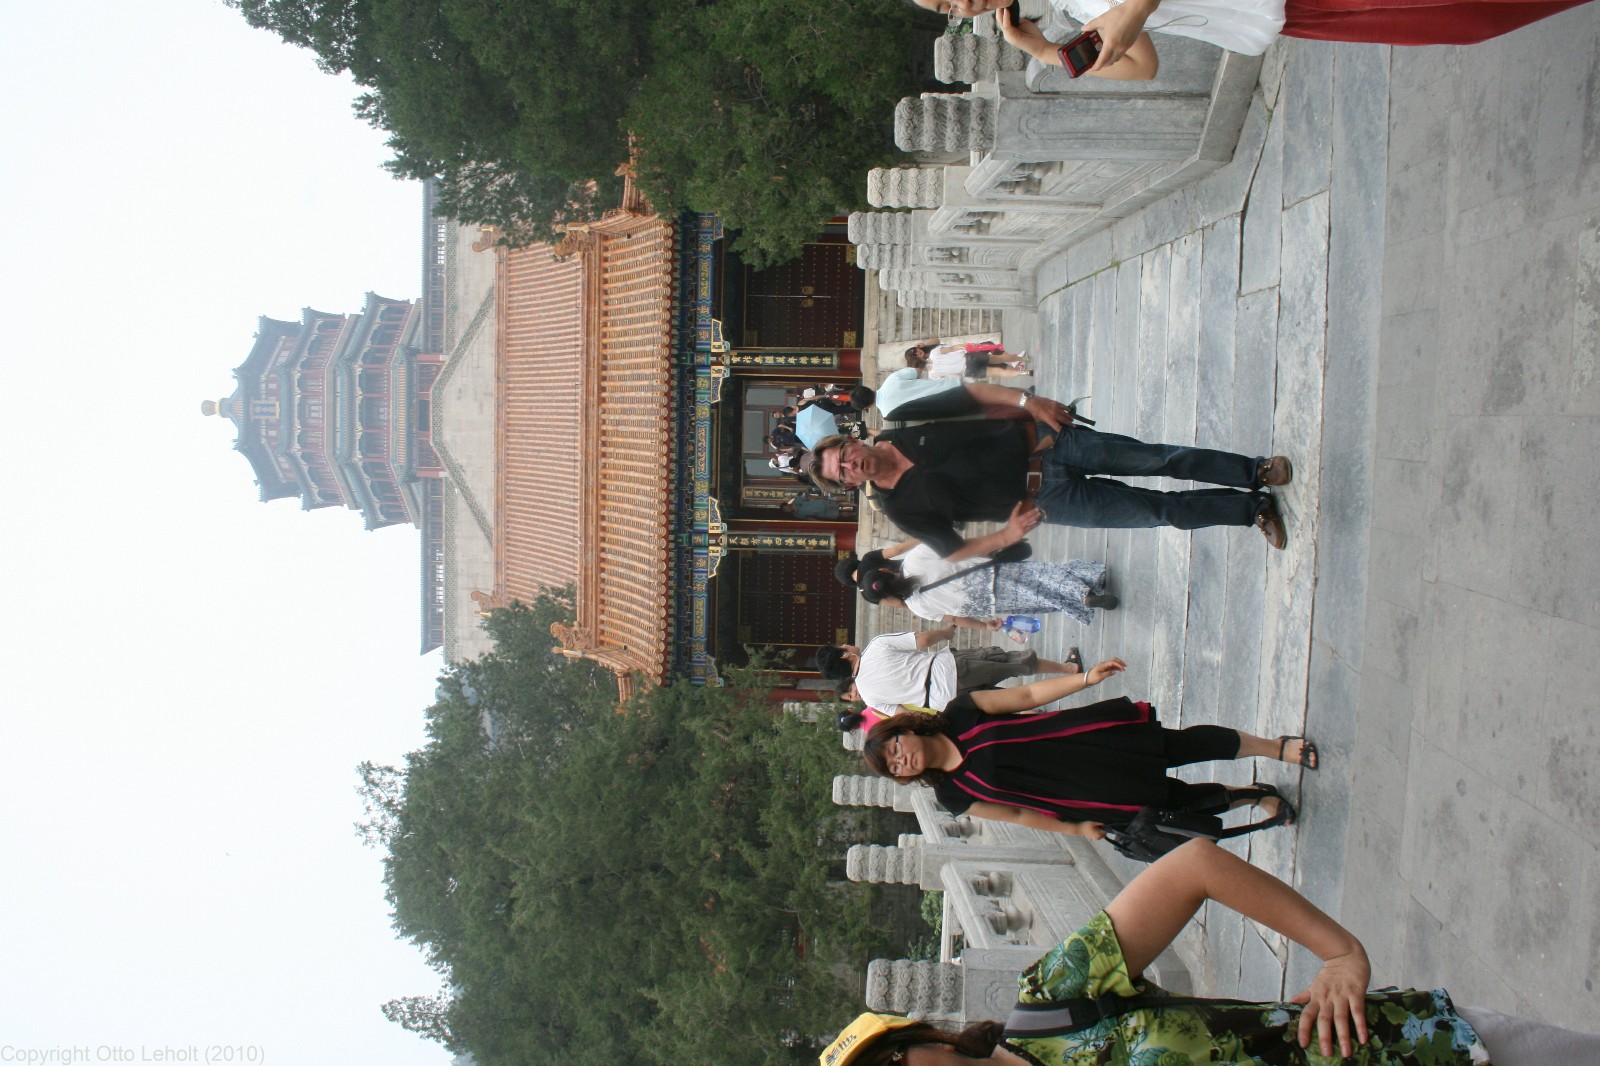 Pictures from China - Copyright Otto Leholt